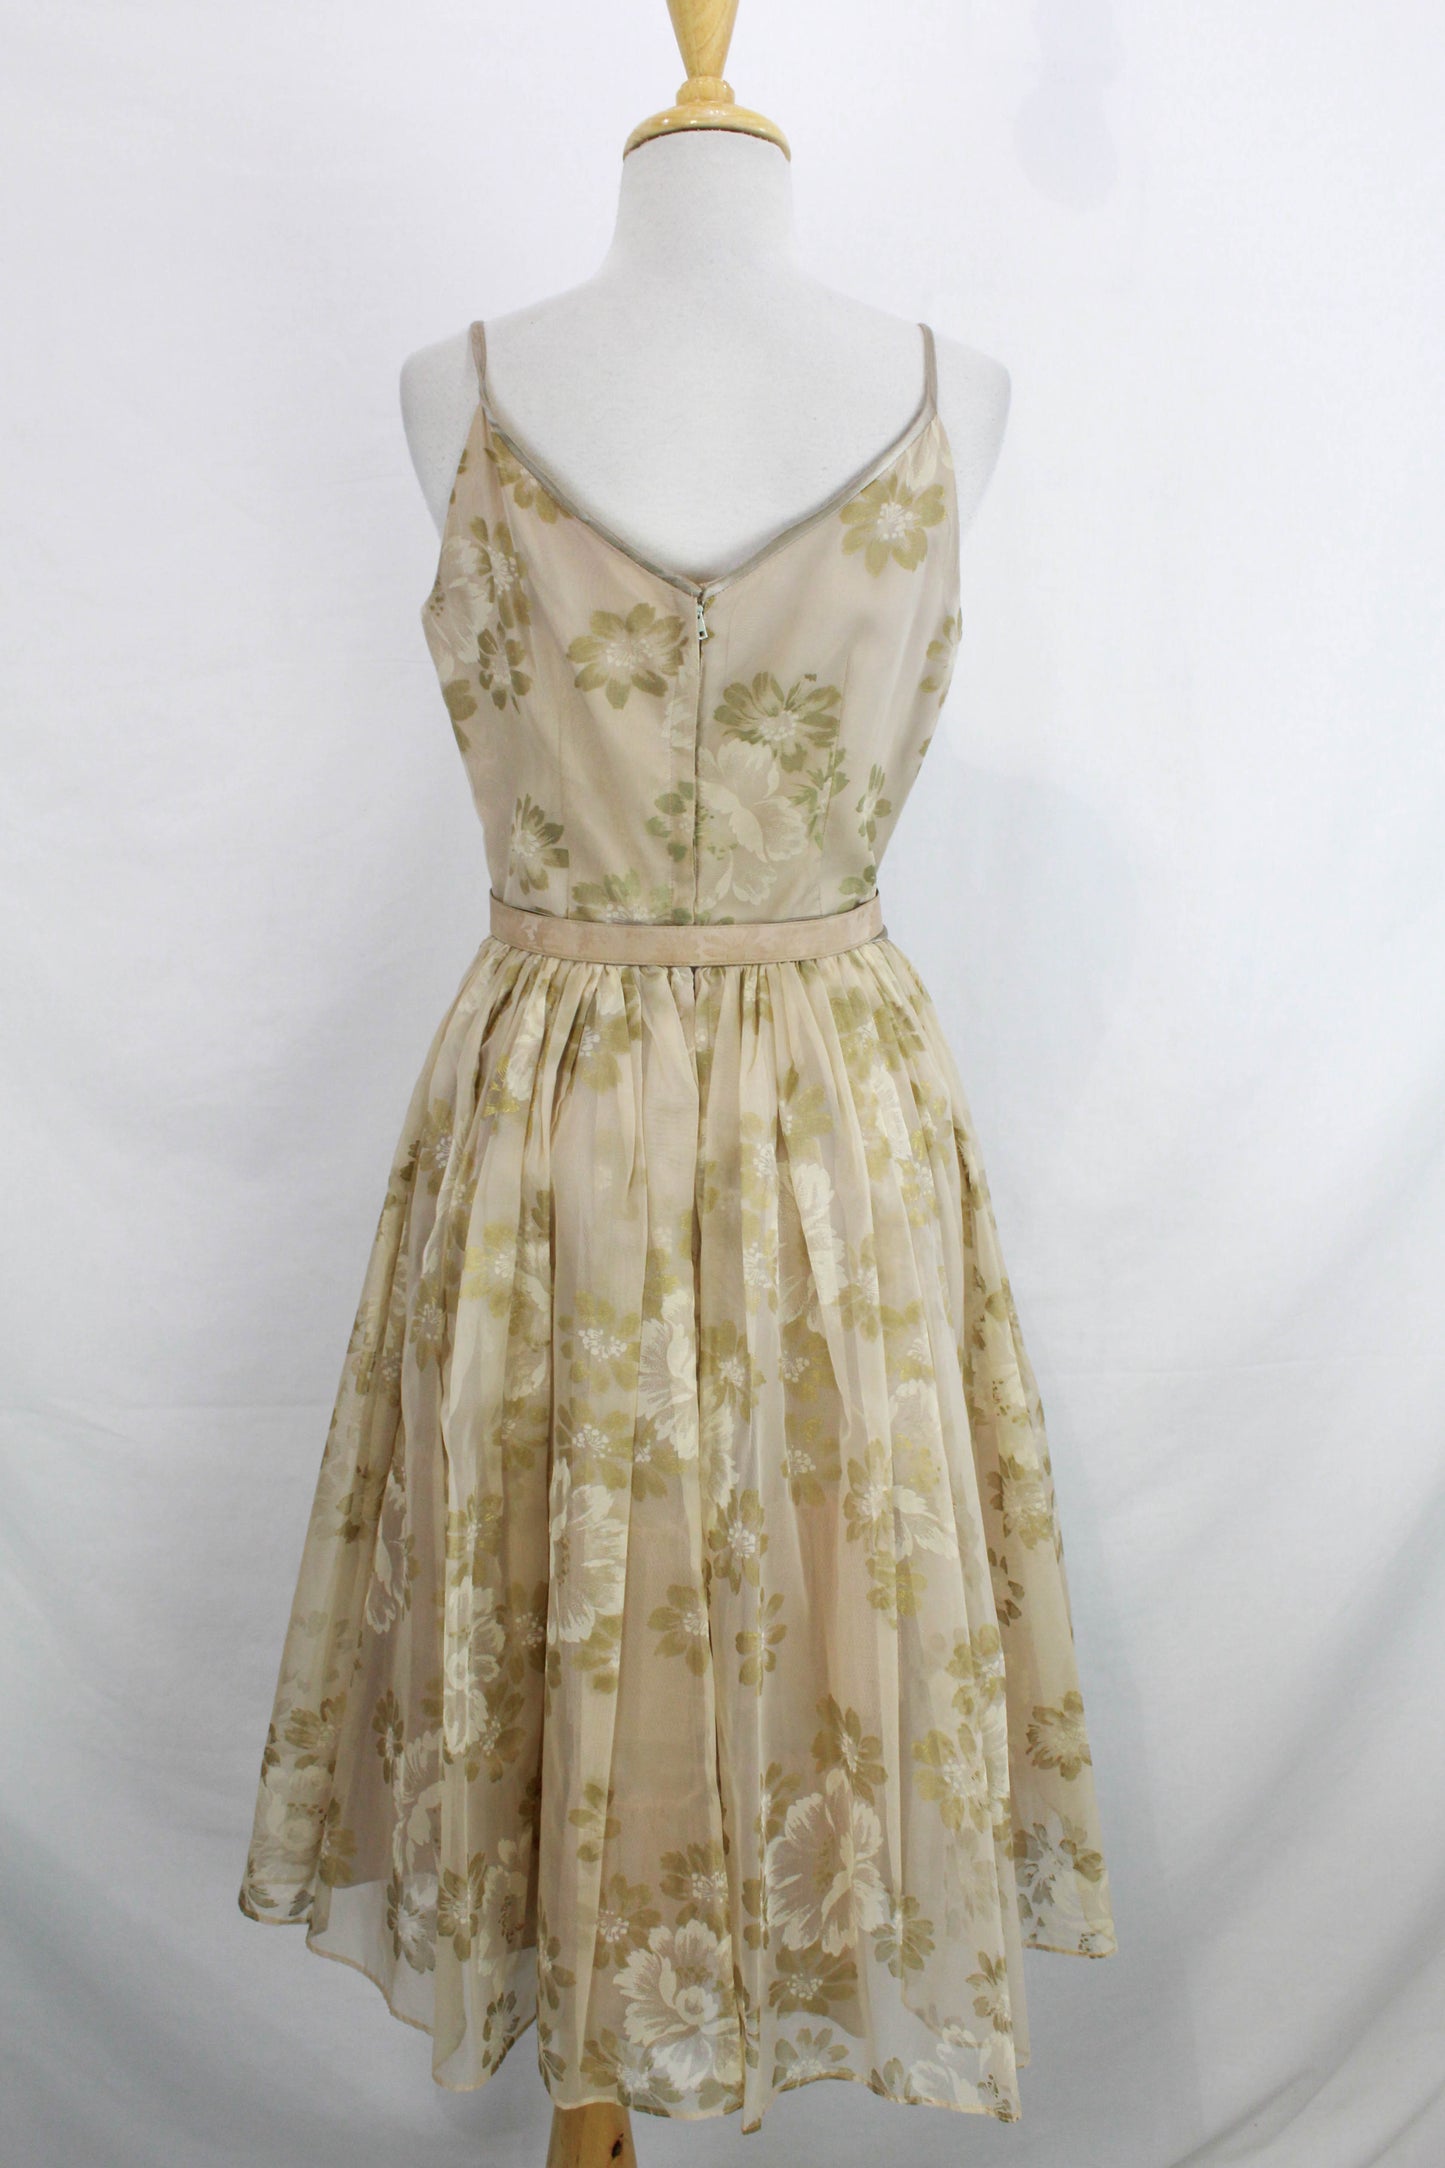 1950s Taupe Floral Print Chiffon Party Dress, Full Skirt Gathered with Matching Belt, Spaghetti Straps, Vintage 50s Womens Fit and Flare, True Vintage, Ian Drummond Vintage